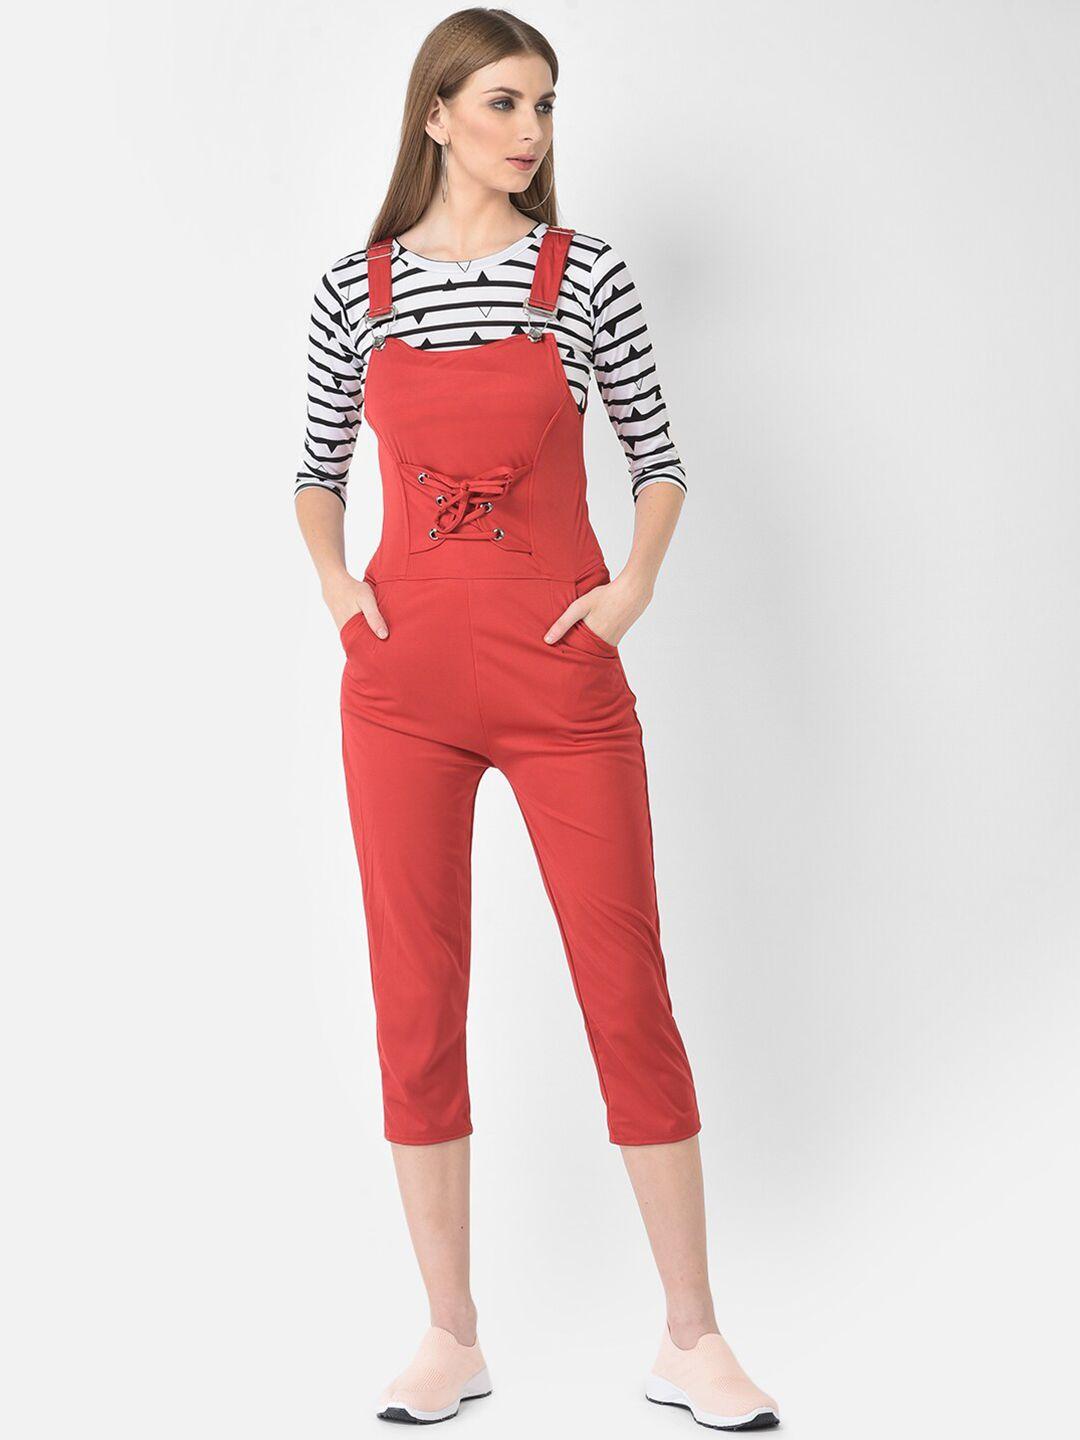 fnocks red & white striped basic jumpsuit